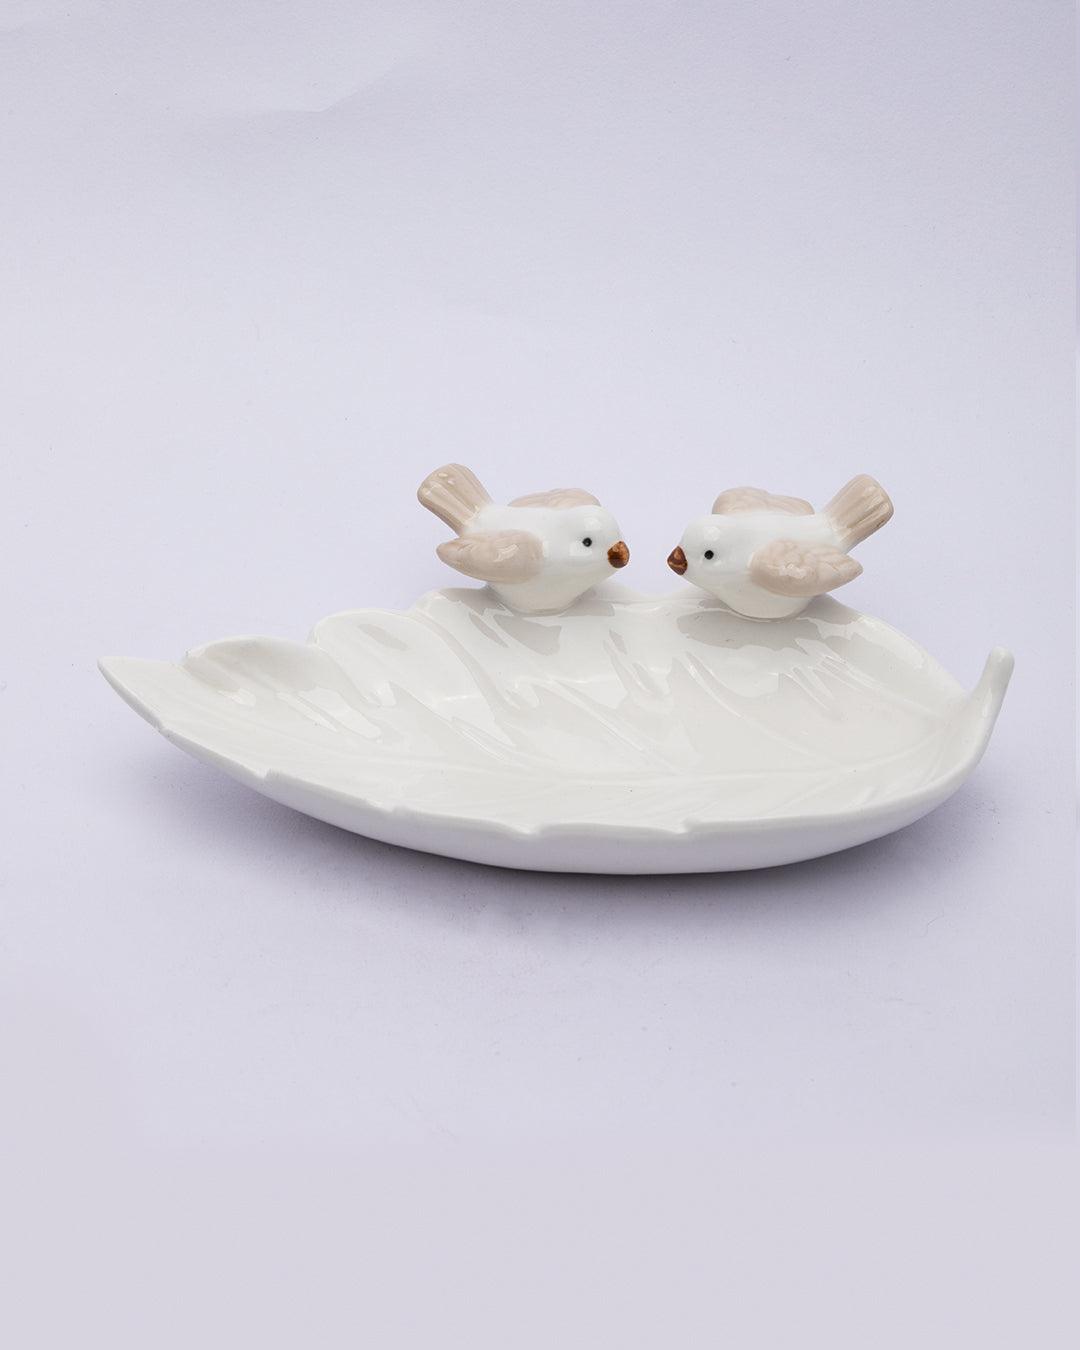 Jewellery Holder Tray, Crafted Bird, for Dressing Table, Ring Dash, Triangle, White, Ceramic, - MARKET 99